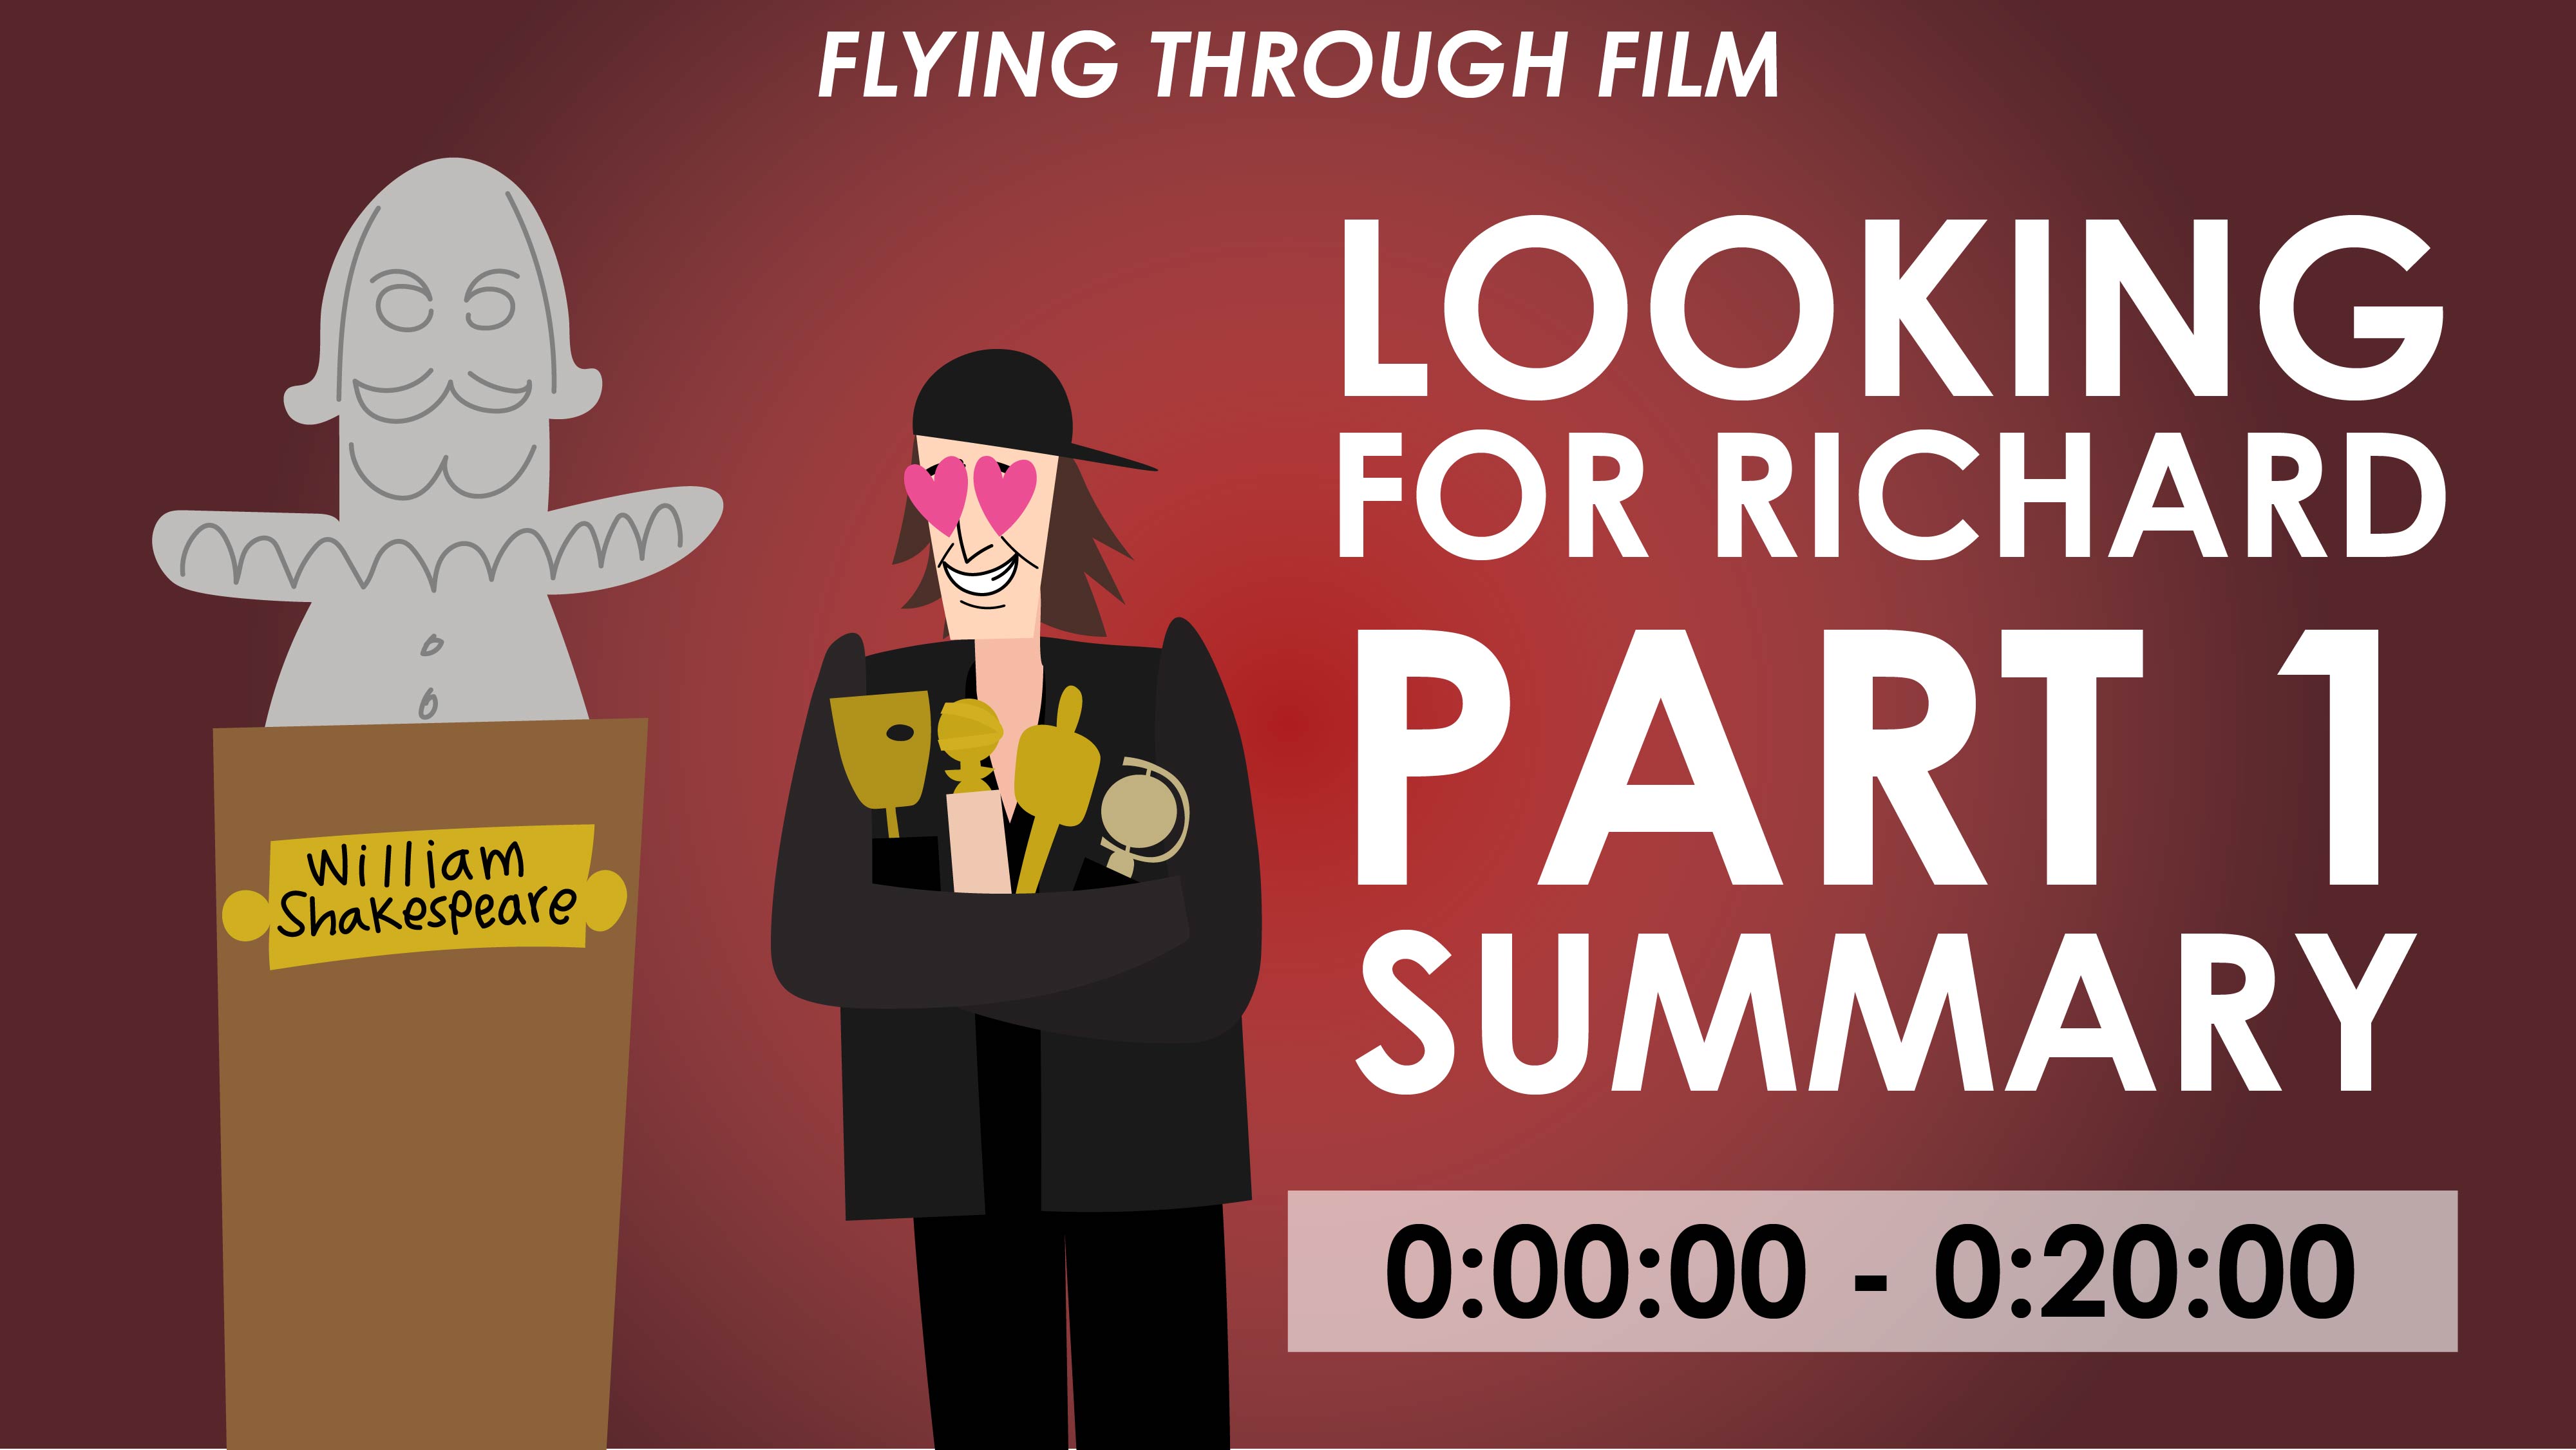 Looking For Richard - Part 1 Summary (0:00:45-0:20:00) - Flying Through Film Series